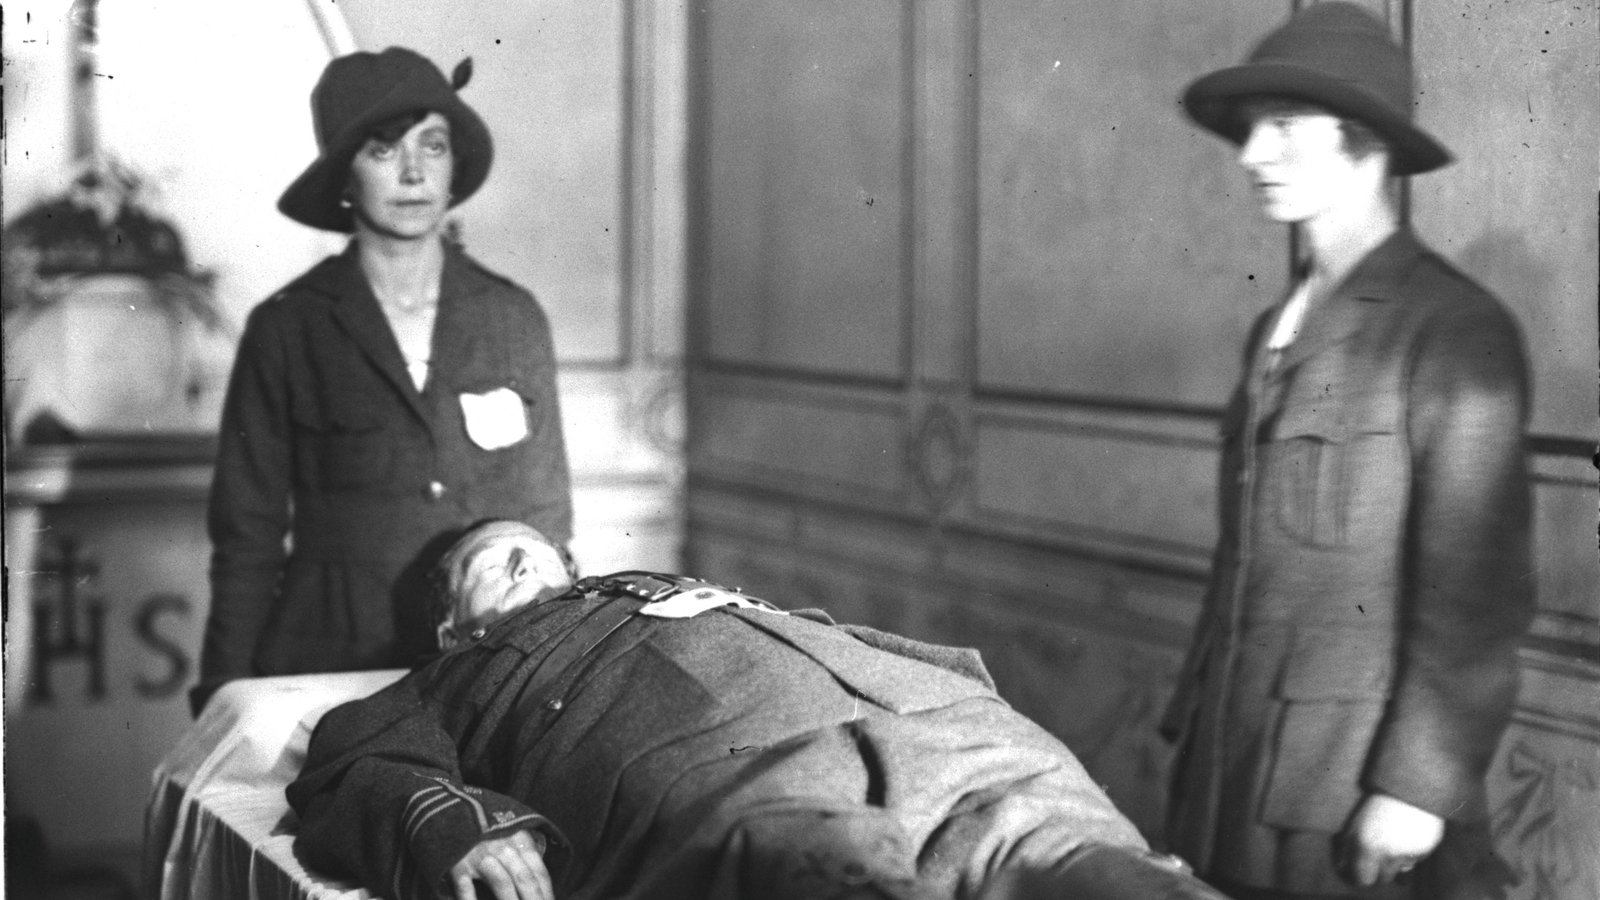 Image - Two uniformed Cumann na mBan members stand guard over the body of Cathal Brugha in 1922. © RTÉ Photographic Archives